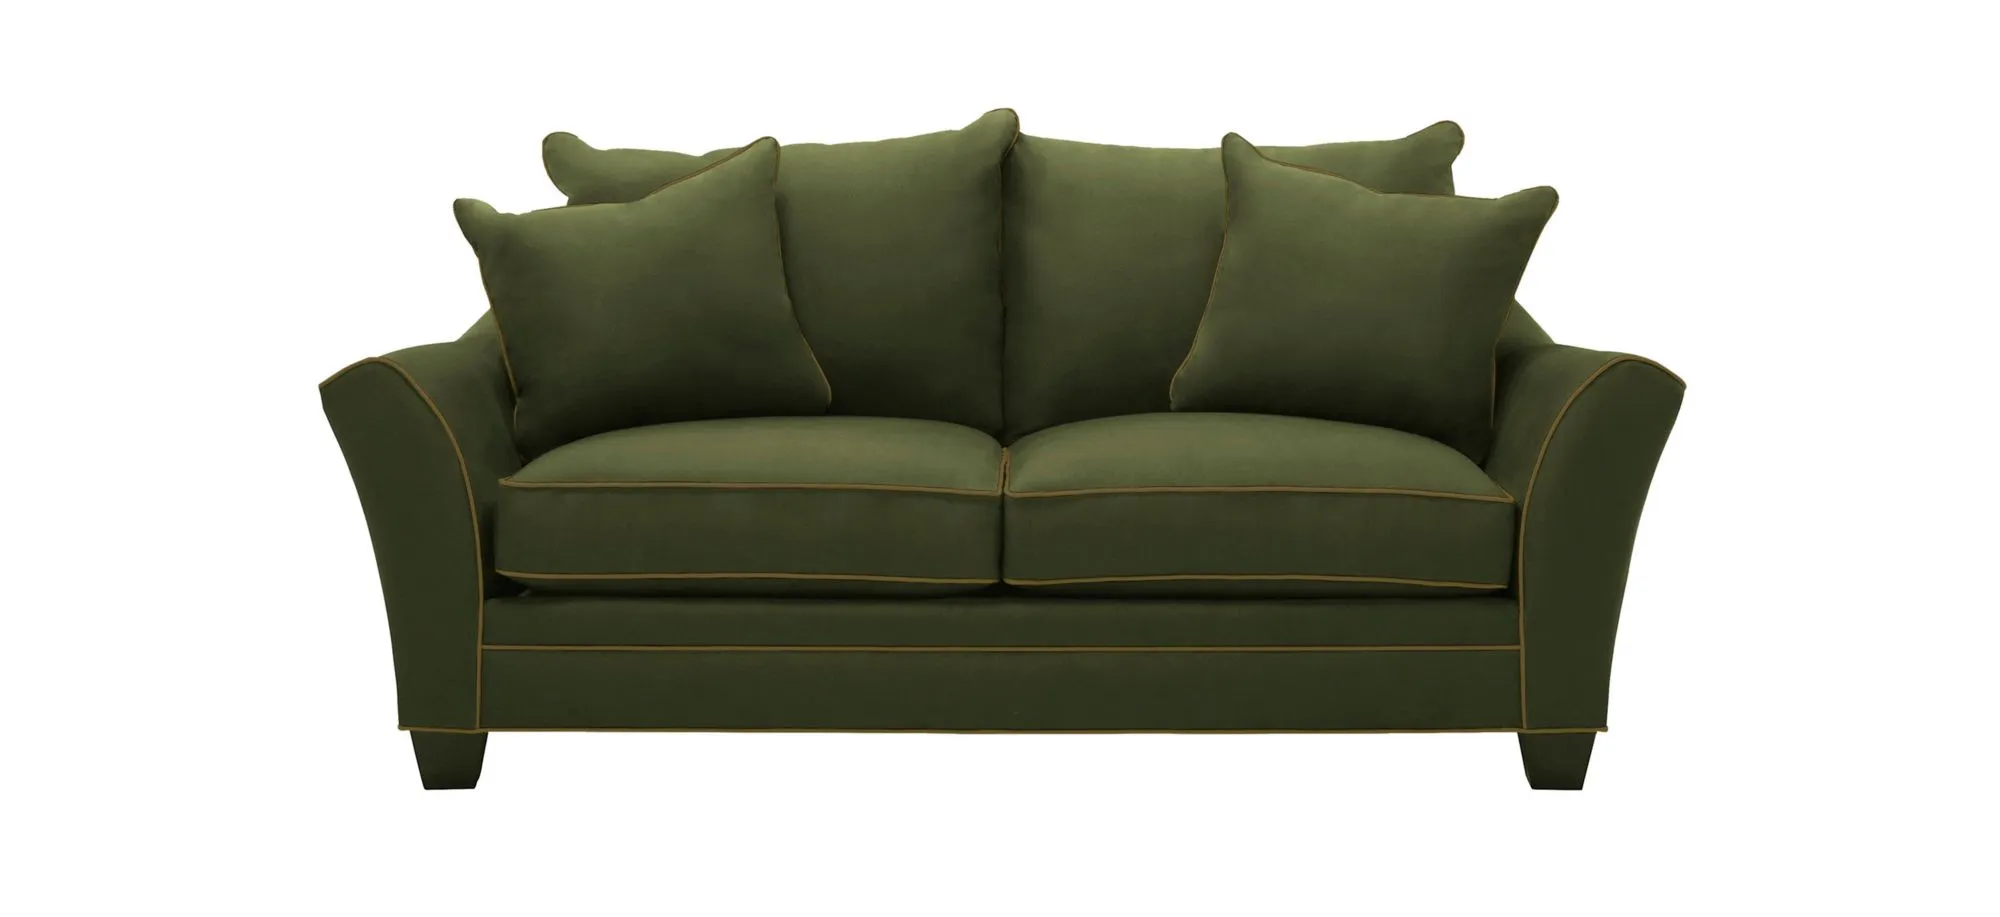 Briarwood Apartment Sofa in Suede So Soft Pine/Khaki by H.M. Richards